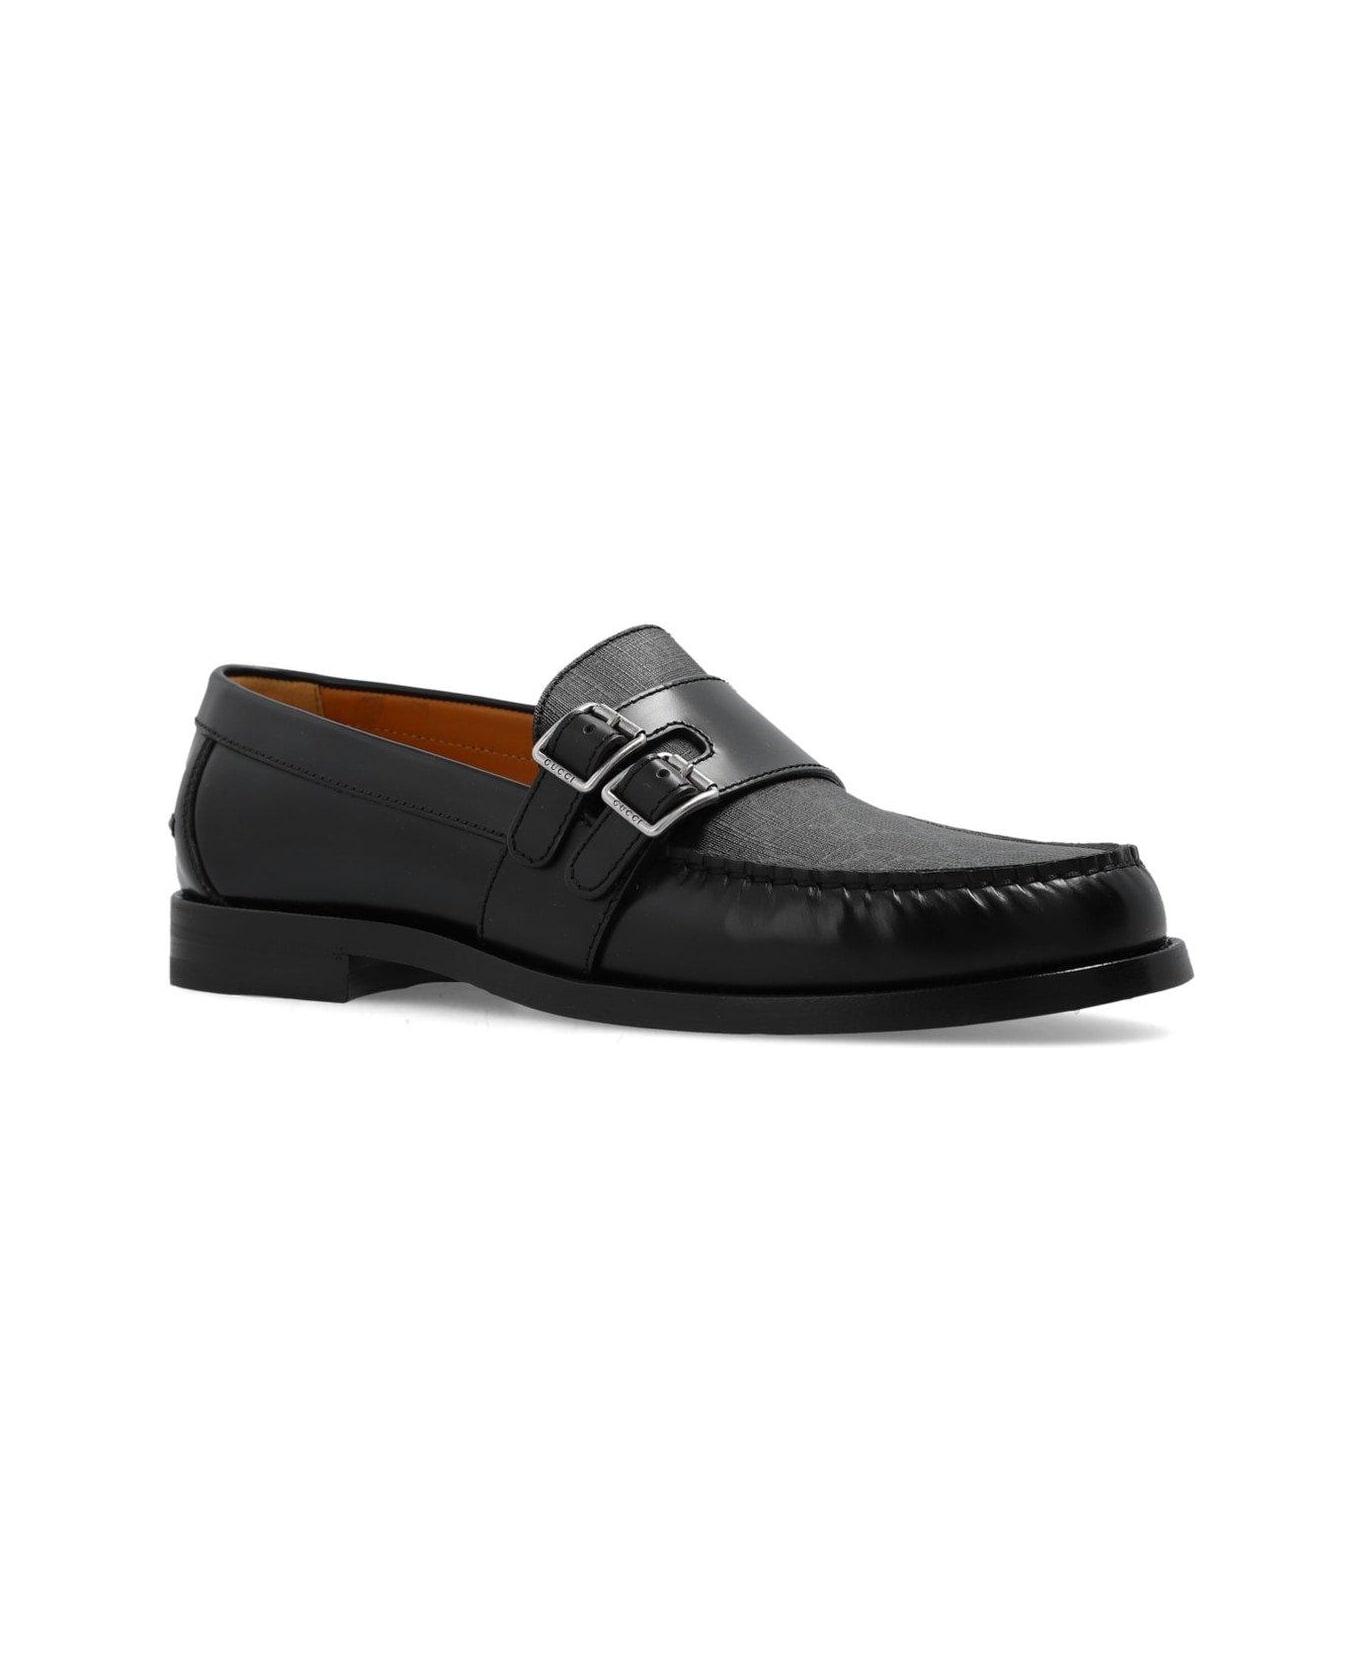 Gucci Buckle Detailed Loafers - Black